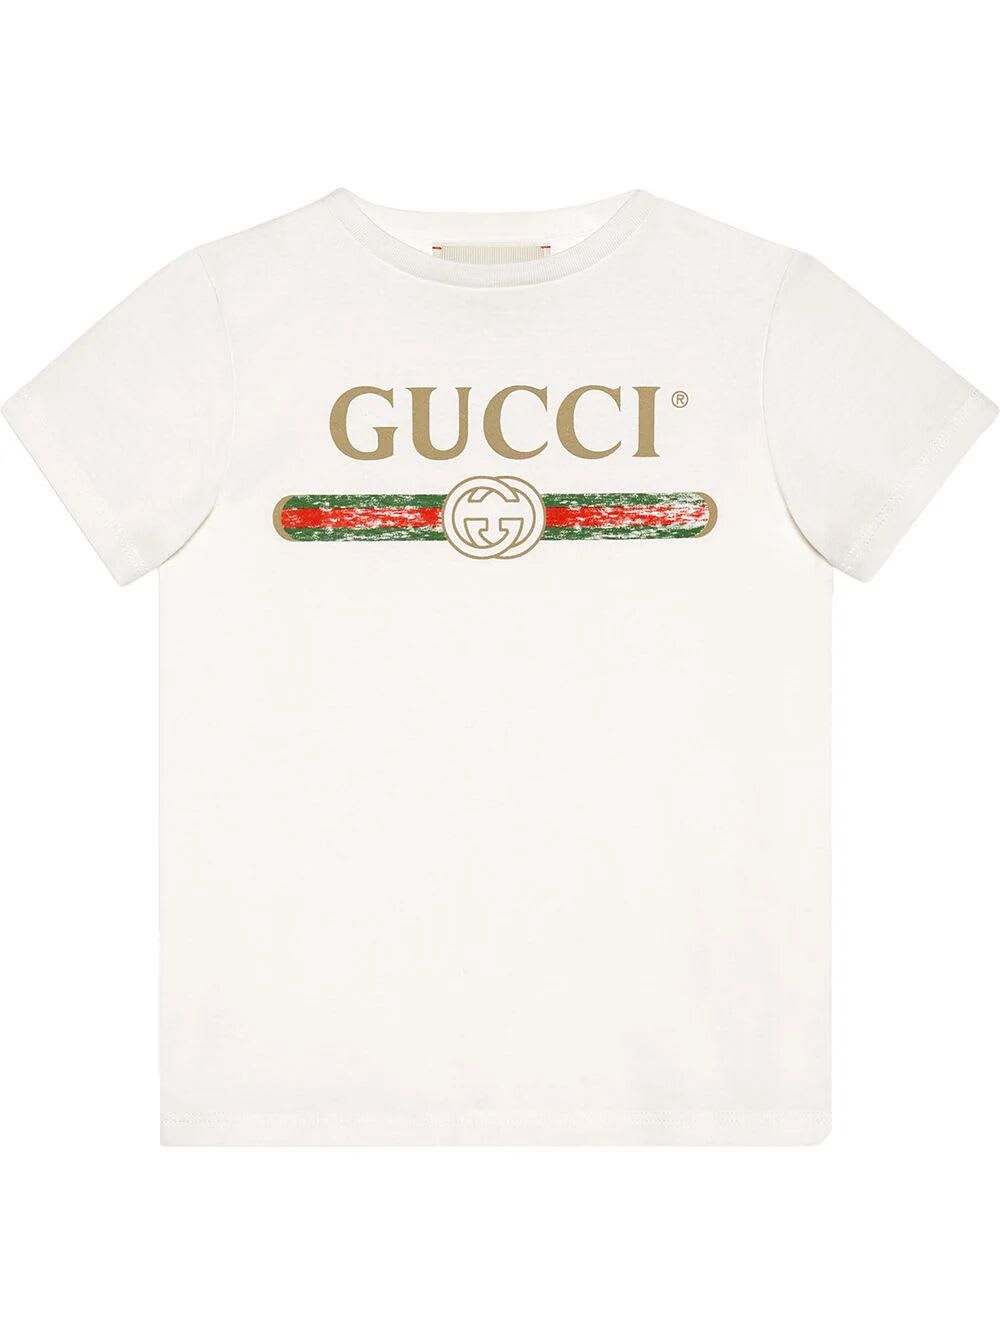 Shop Gucci T-shirt Cotton Jersey In White Green Red